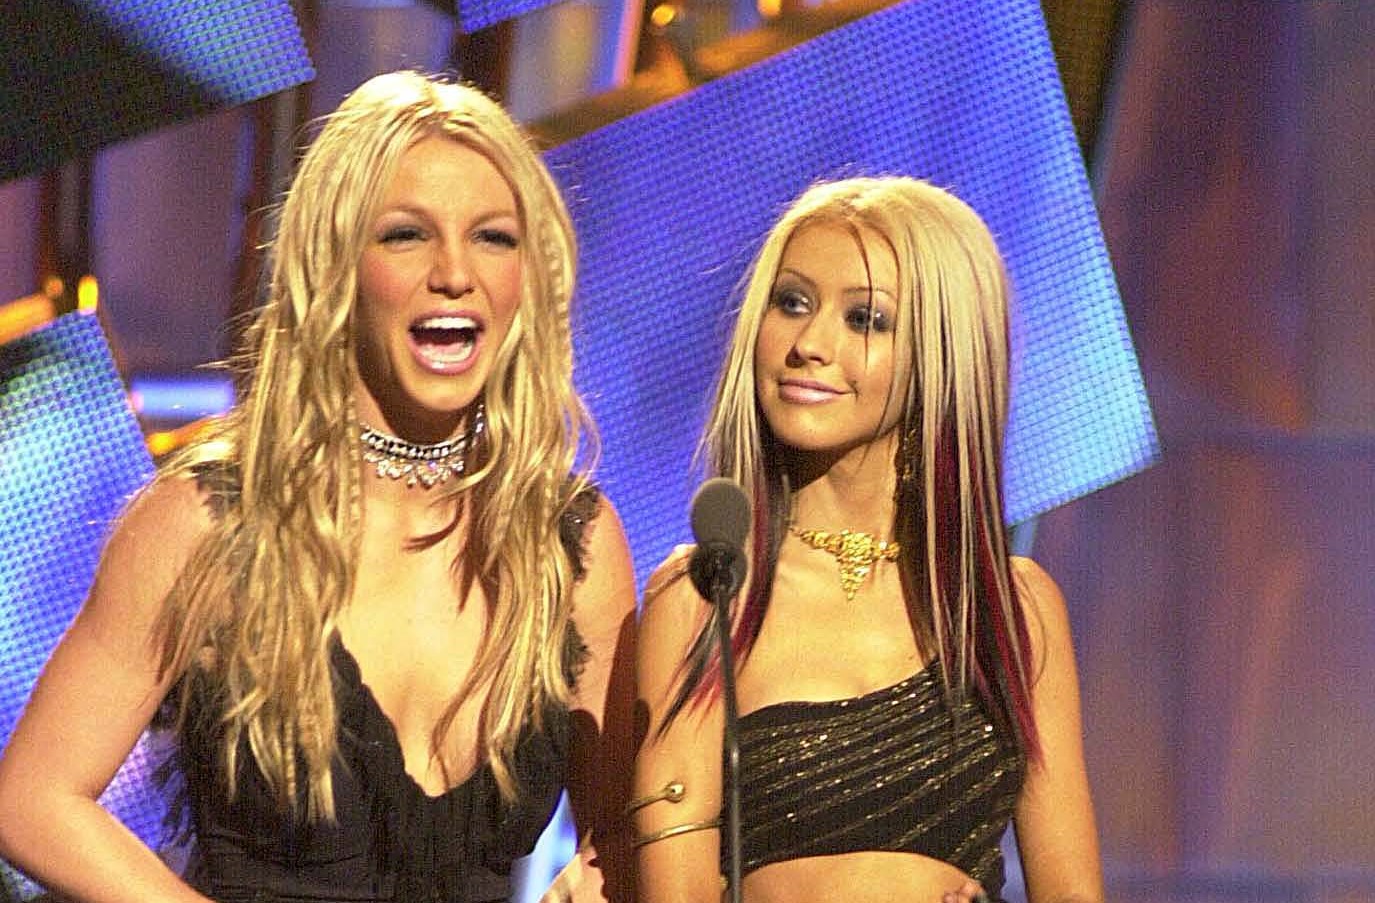 Britney Spears and Christina Aguilera wear black tank tops and stand in front of a microphone at the VMAs.